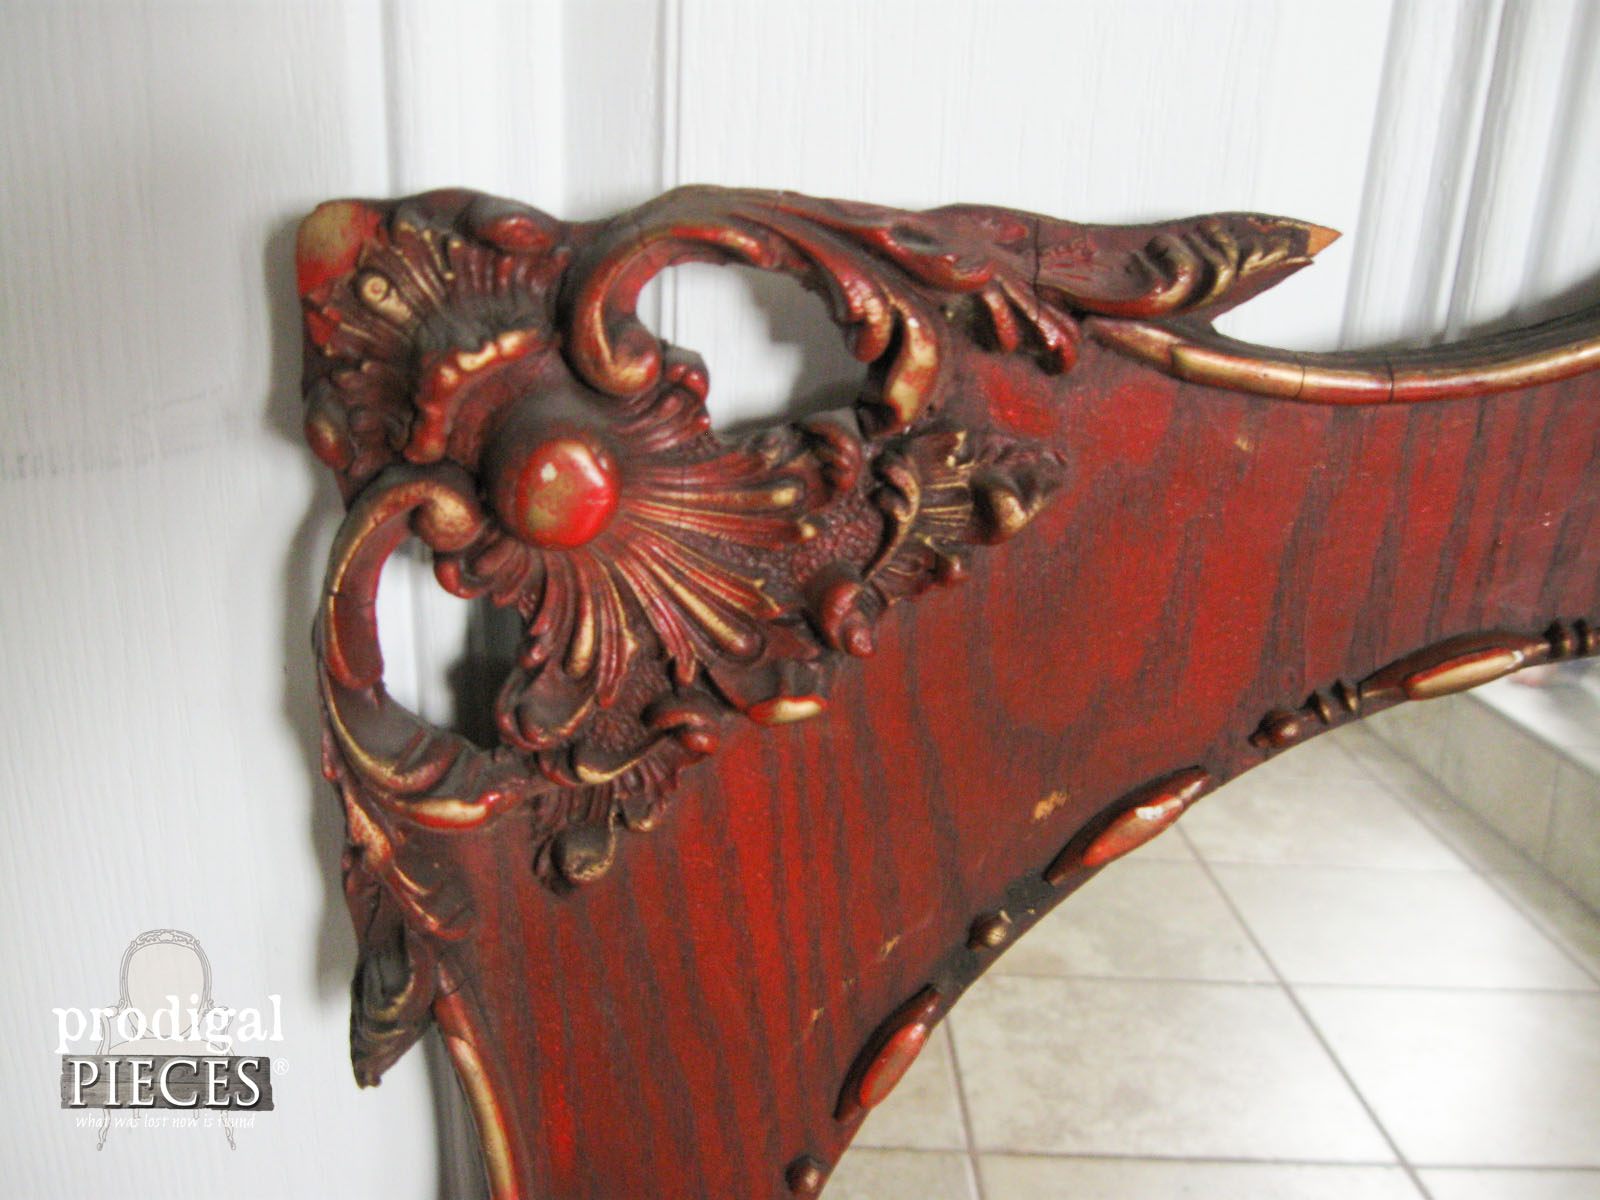 Corner of Ornate Mirror for Aged Finish Treatment | Prodigal Pieces | www.prodigalpieces.com